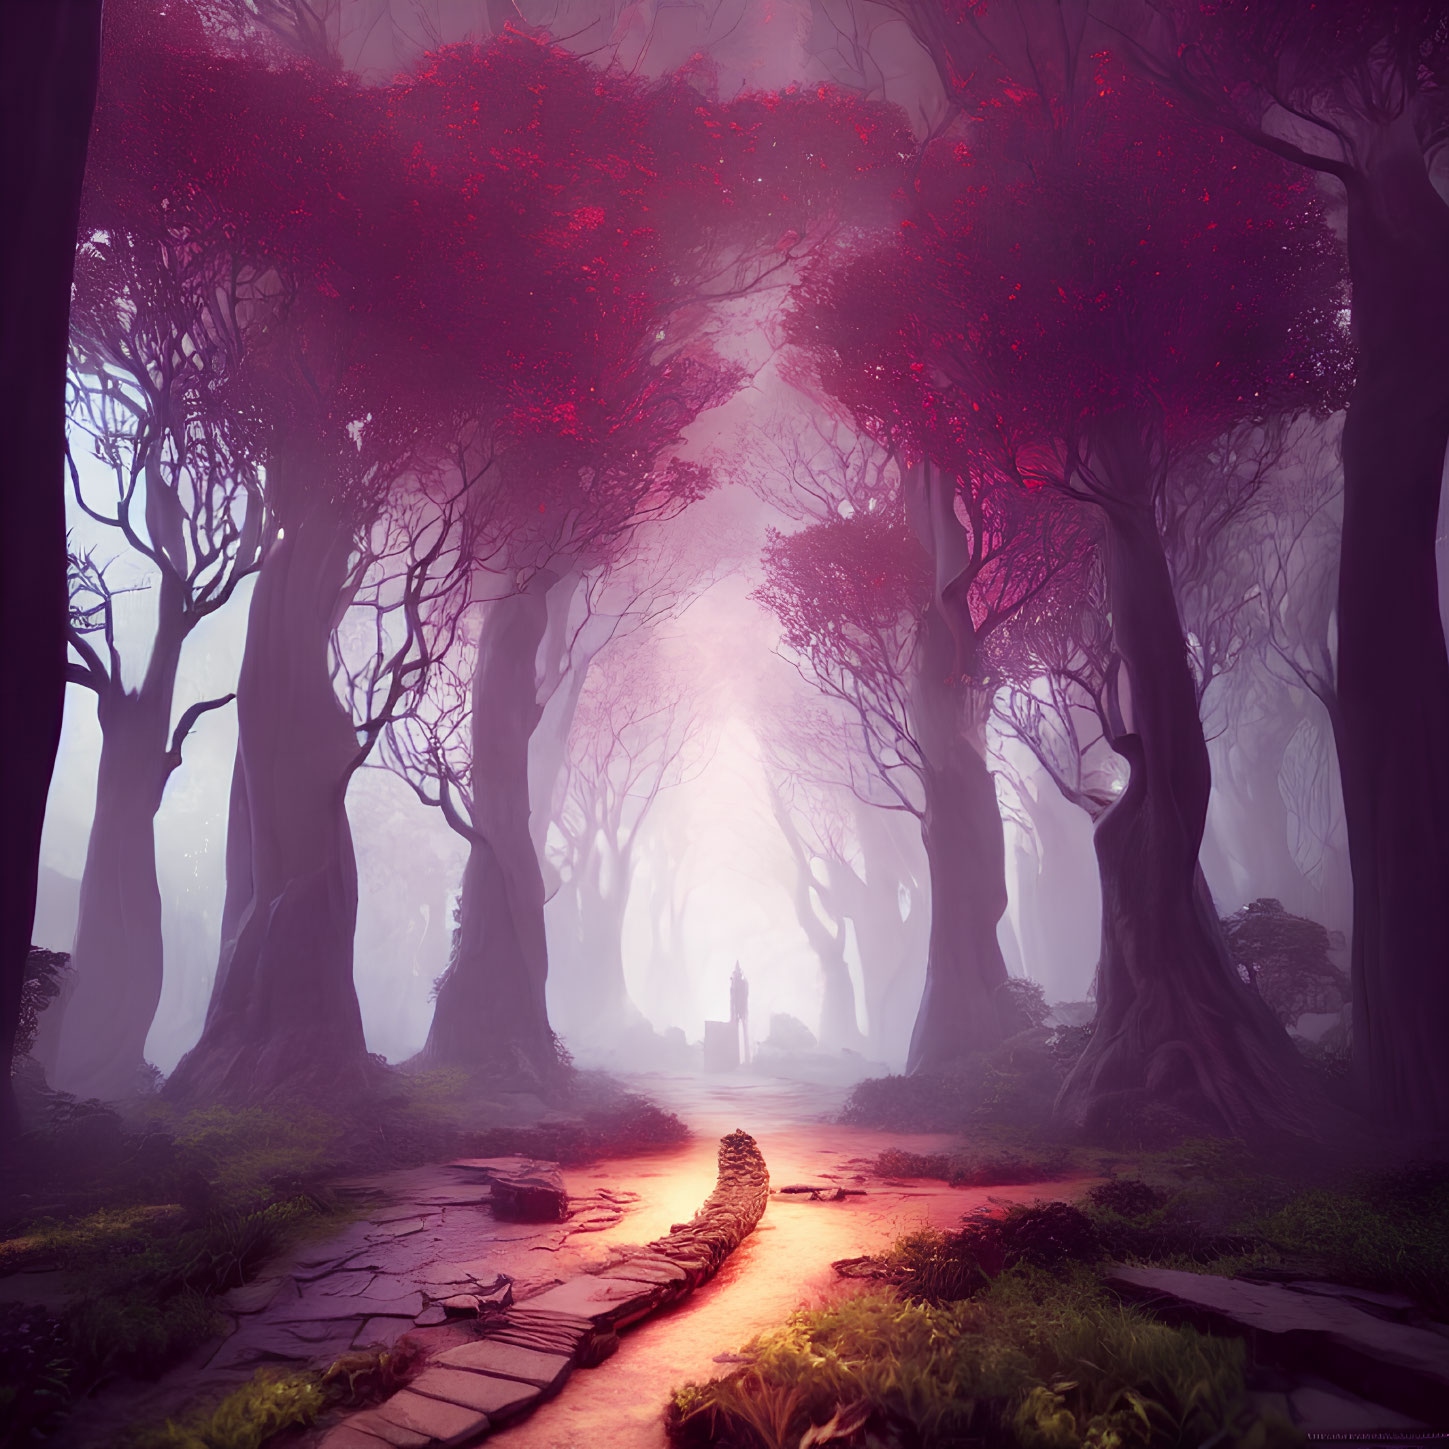 Misty forest with pink foliage, cobblestone path, and mysterious figure.